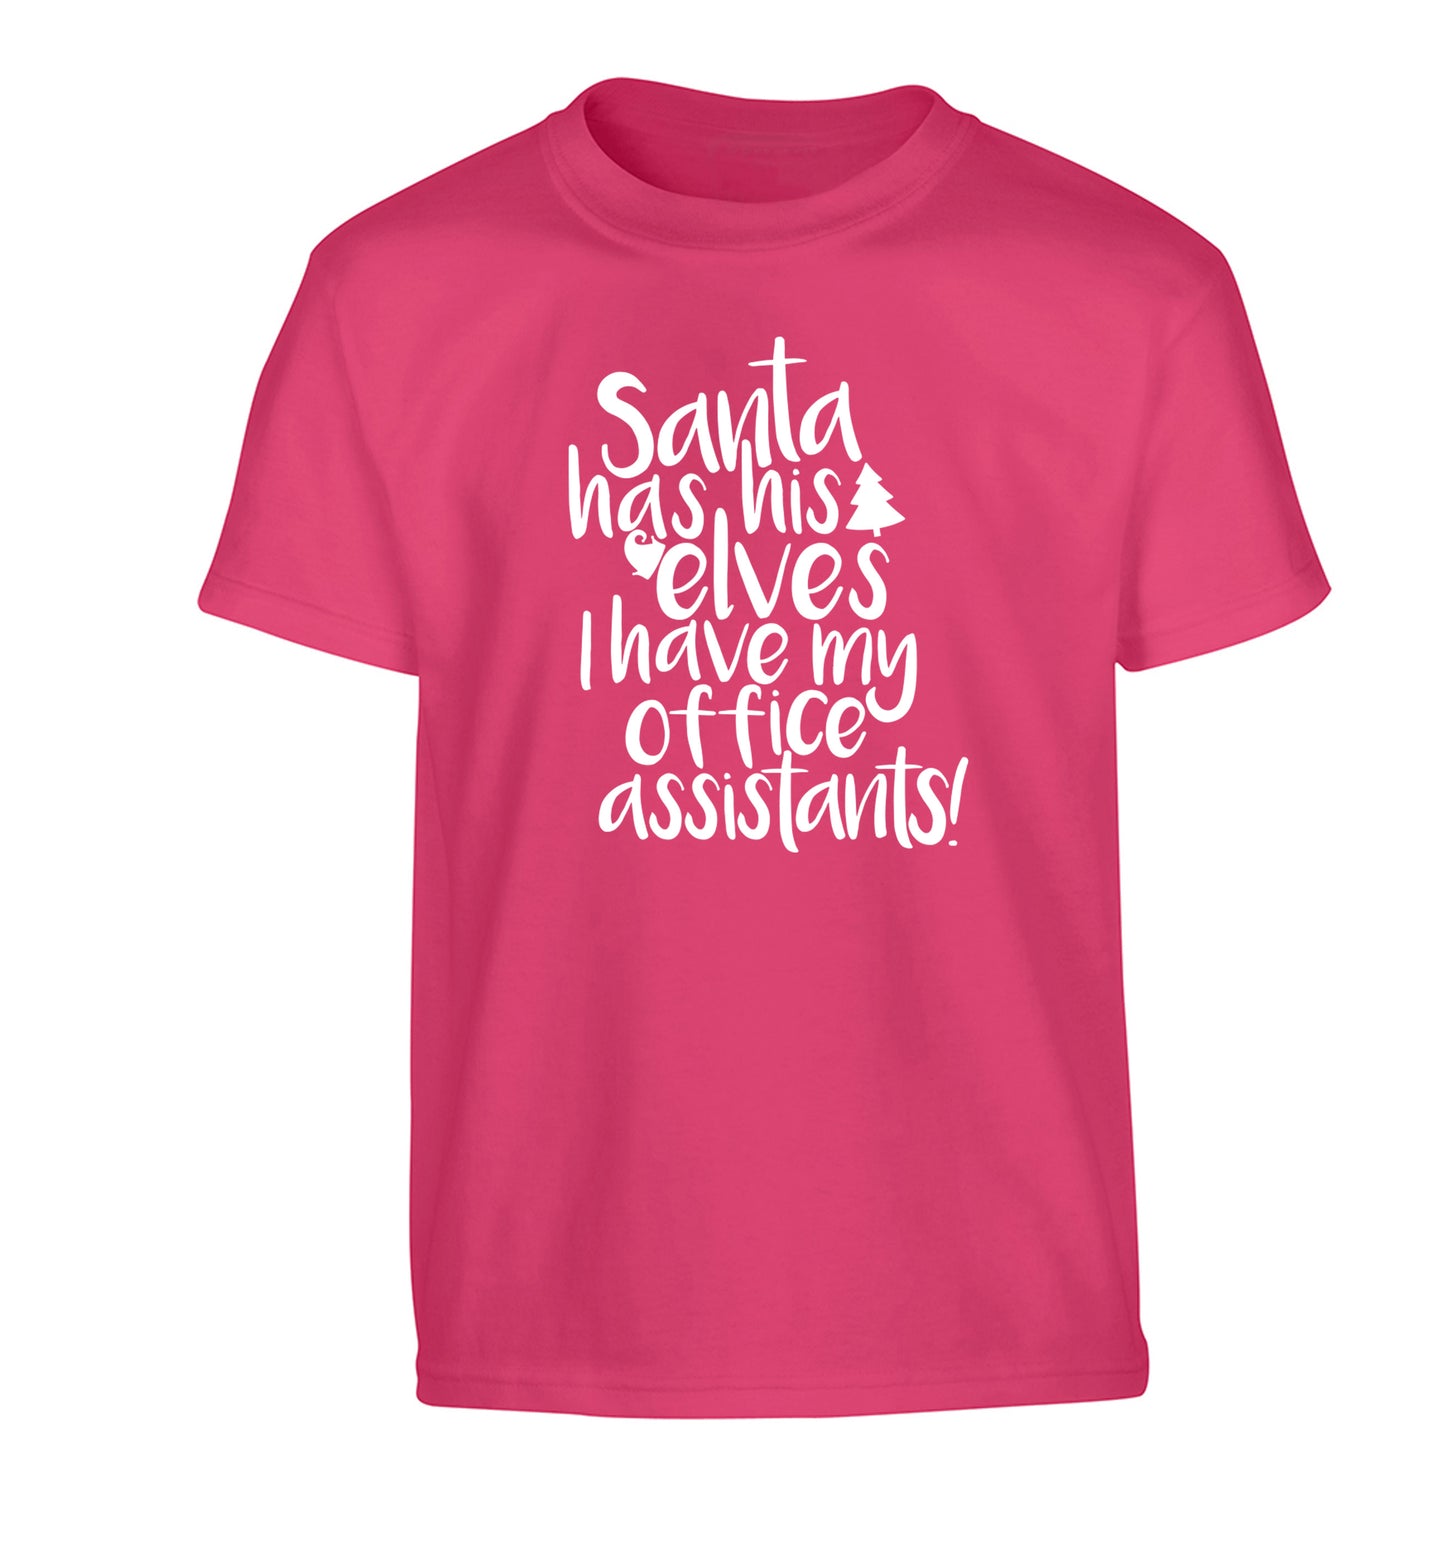 Santa has elves I have office assistants Children's pink Tshirt 12-13 Years